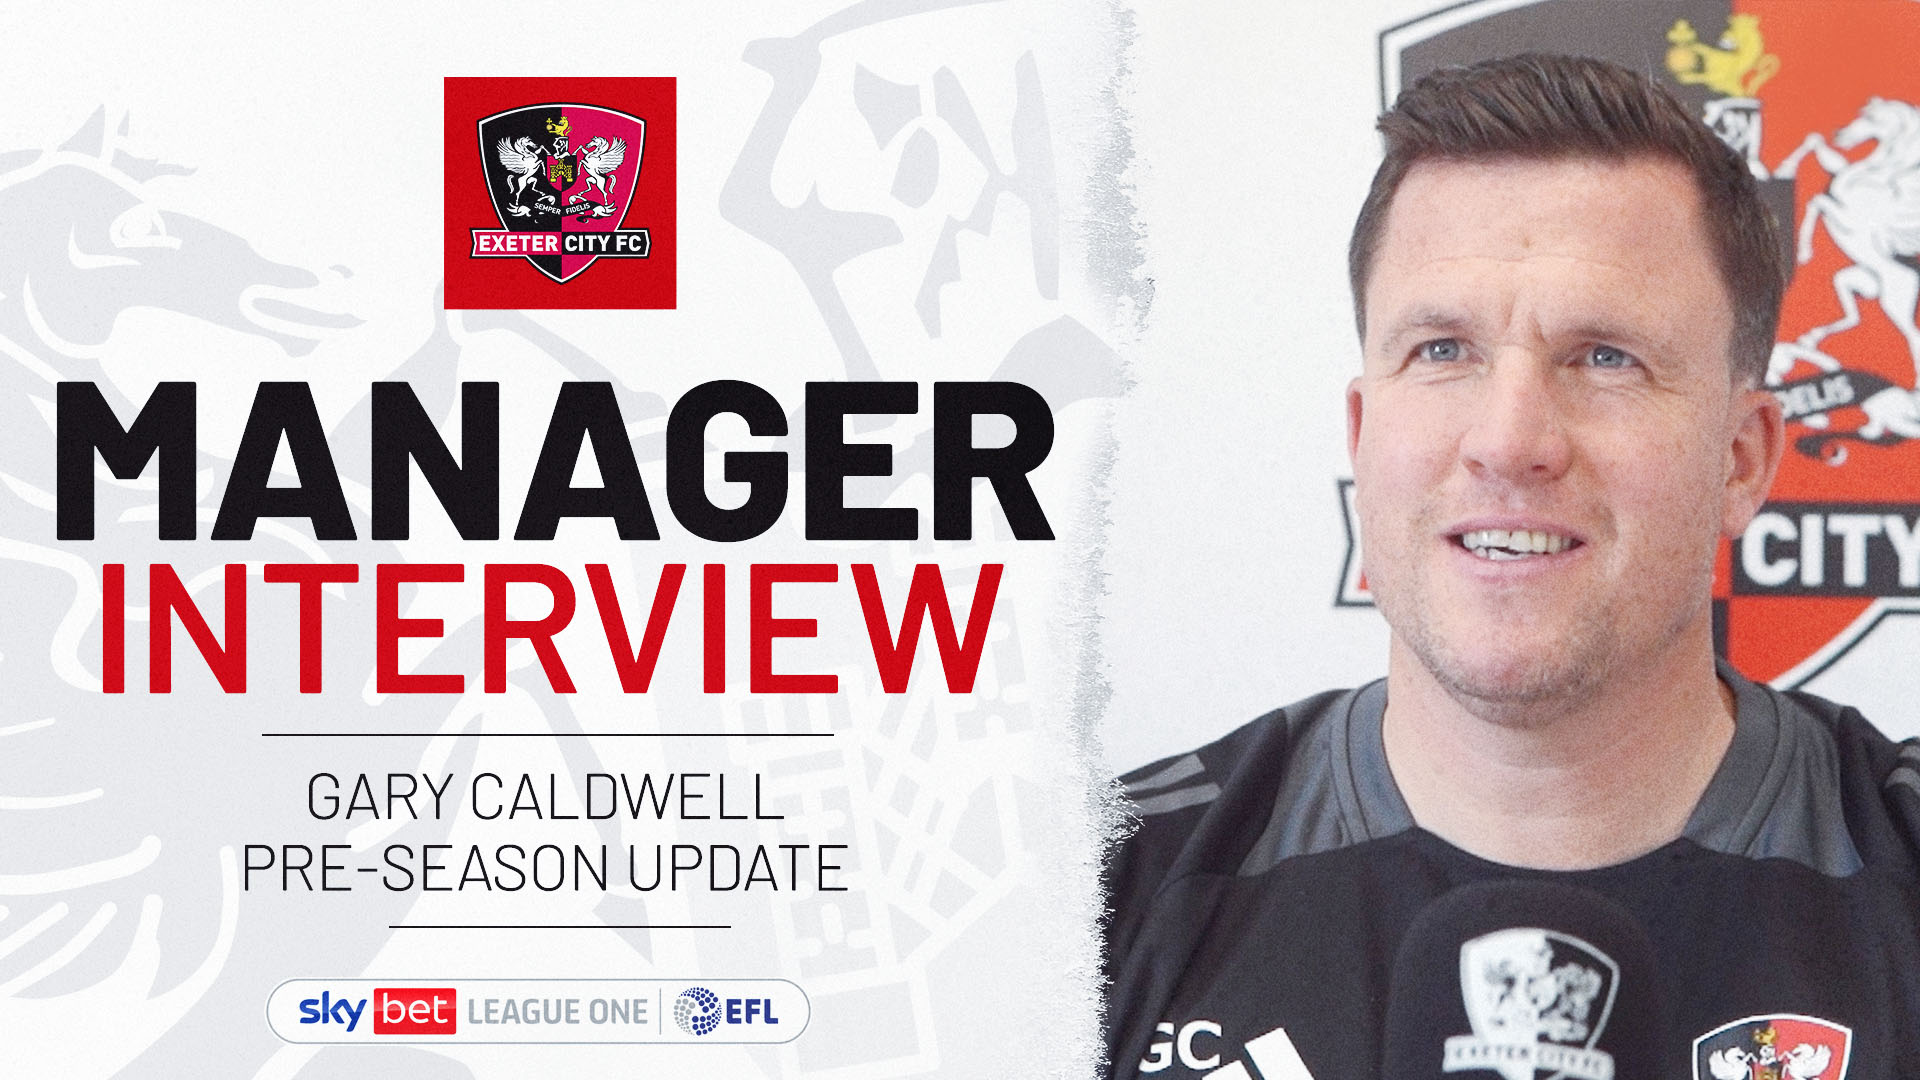 Image of Gary Caldwell with the words 'Manager Interview: Gary Caldwell Pre-season Update'